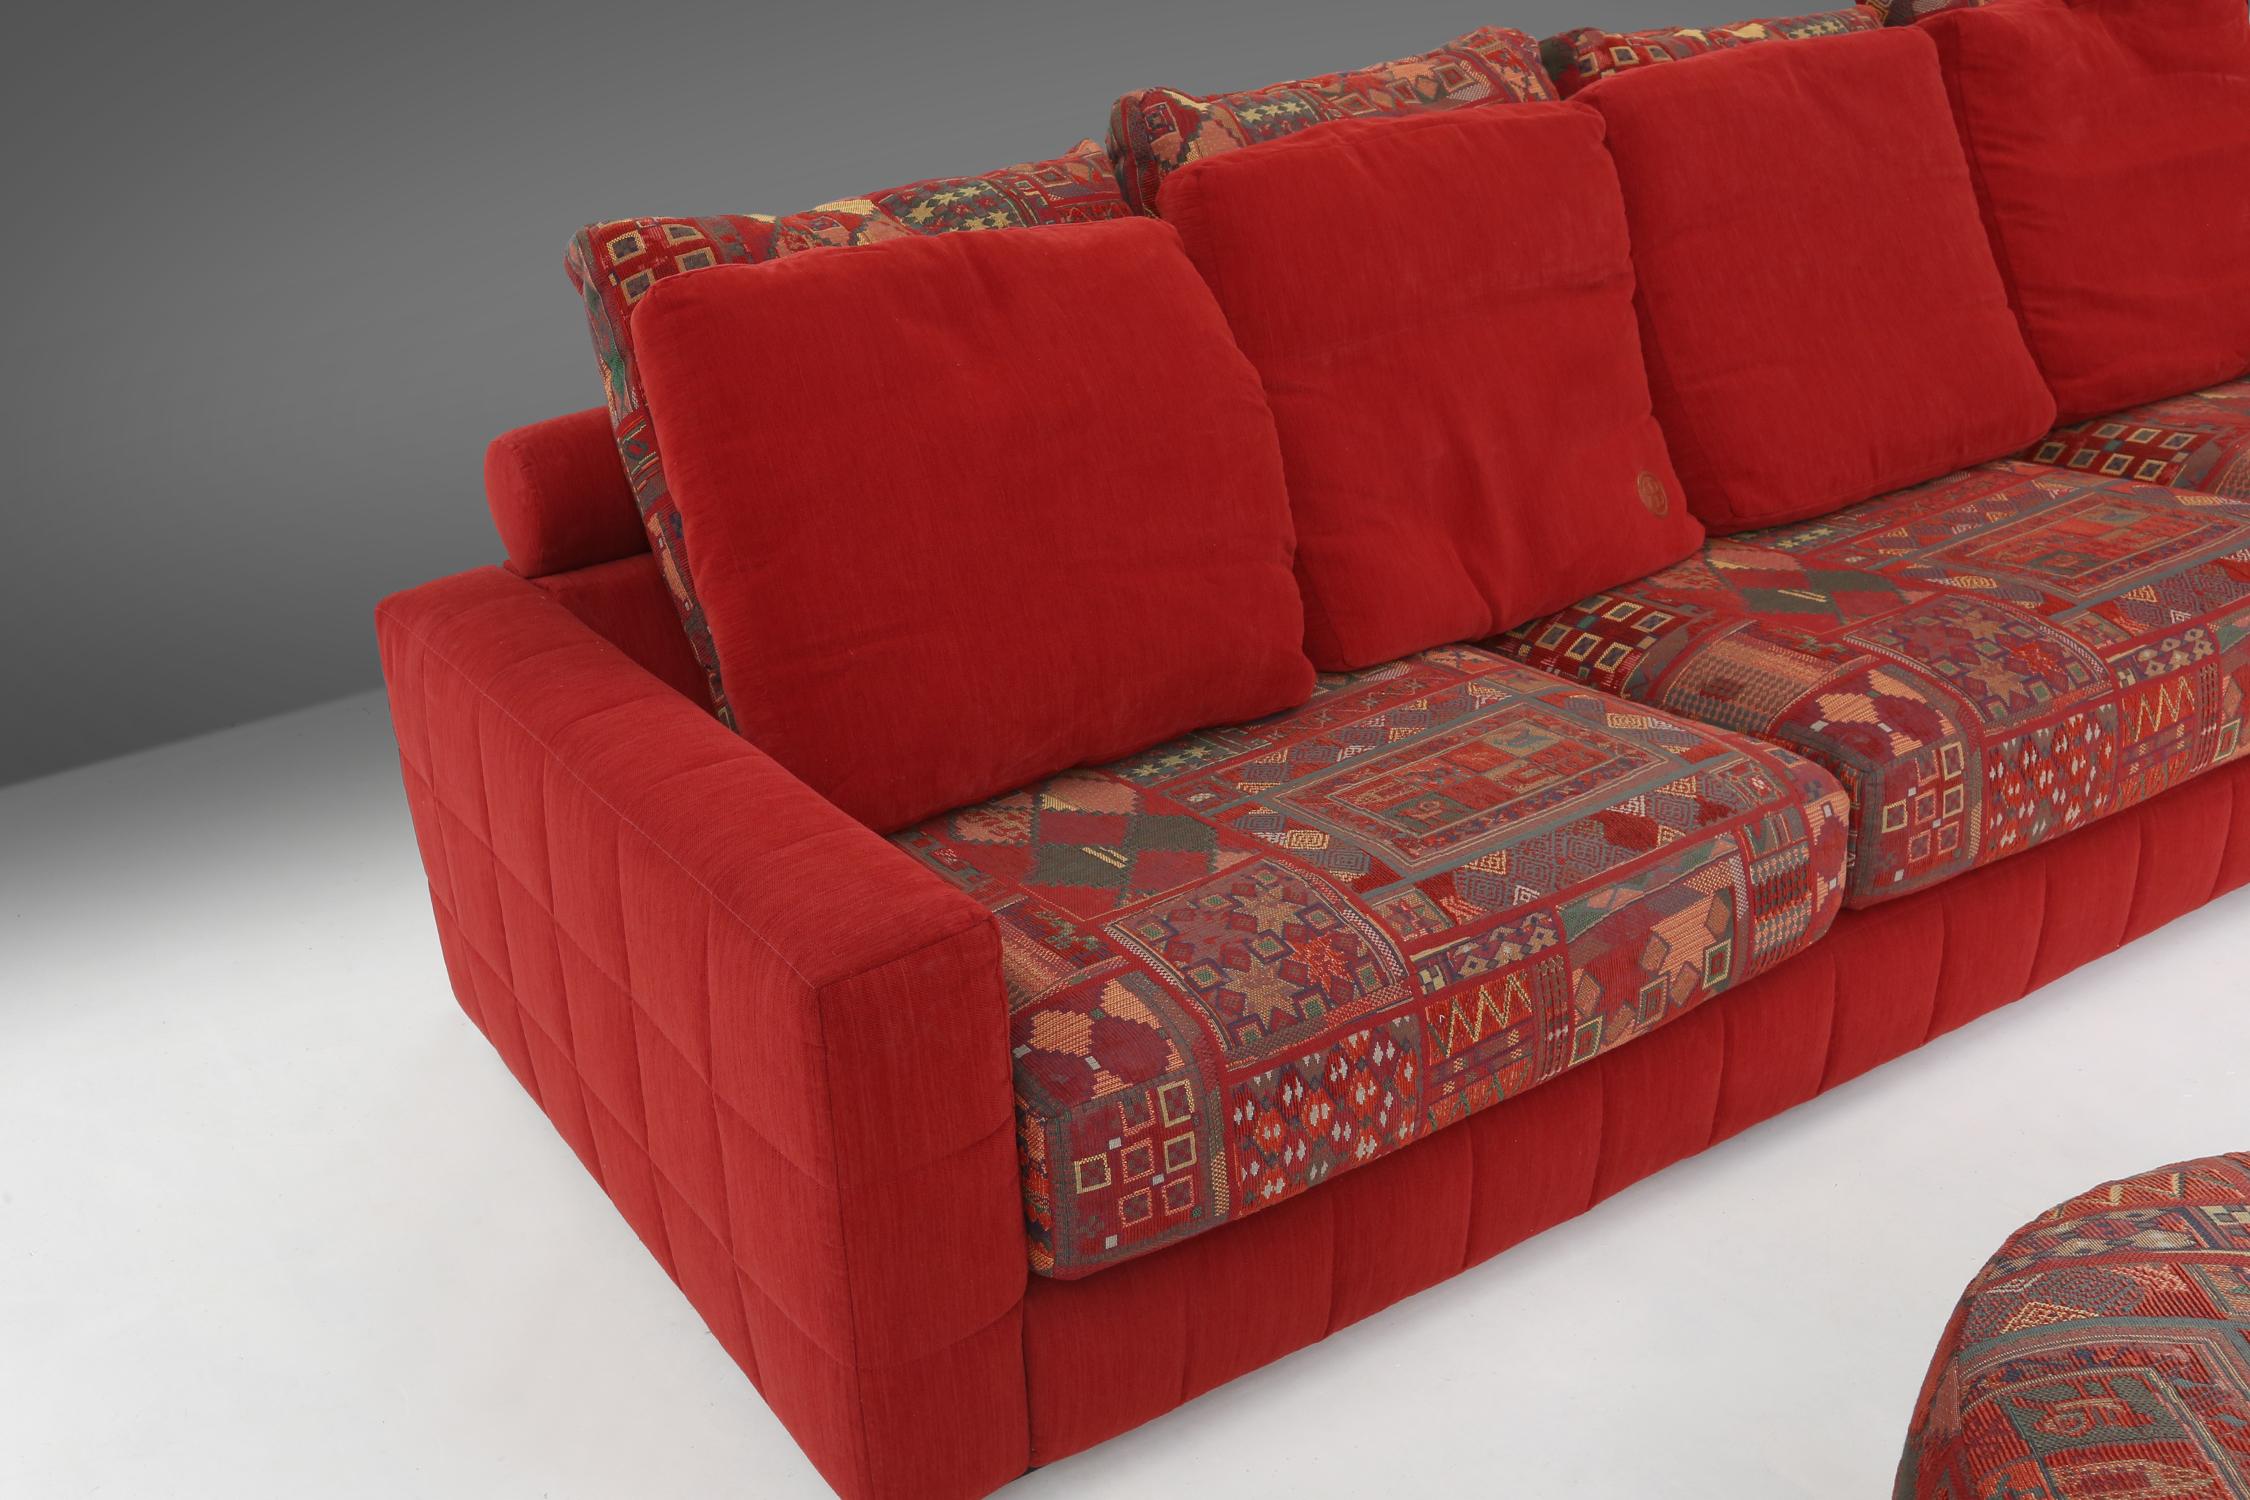 Roche Bobois modular sofa in red and patterned upholstery 1980 For Sale 6